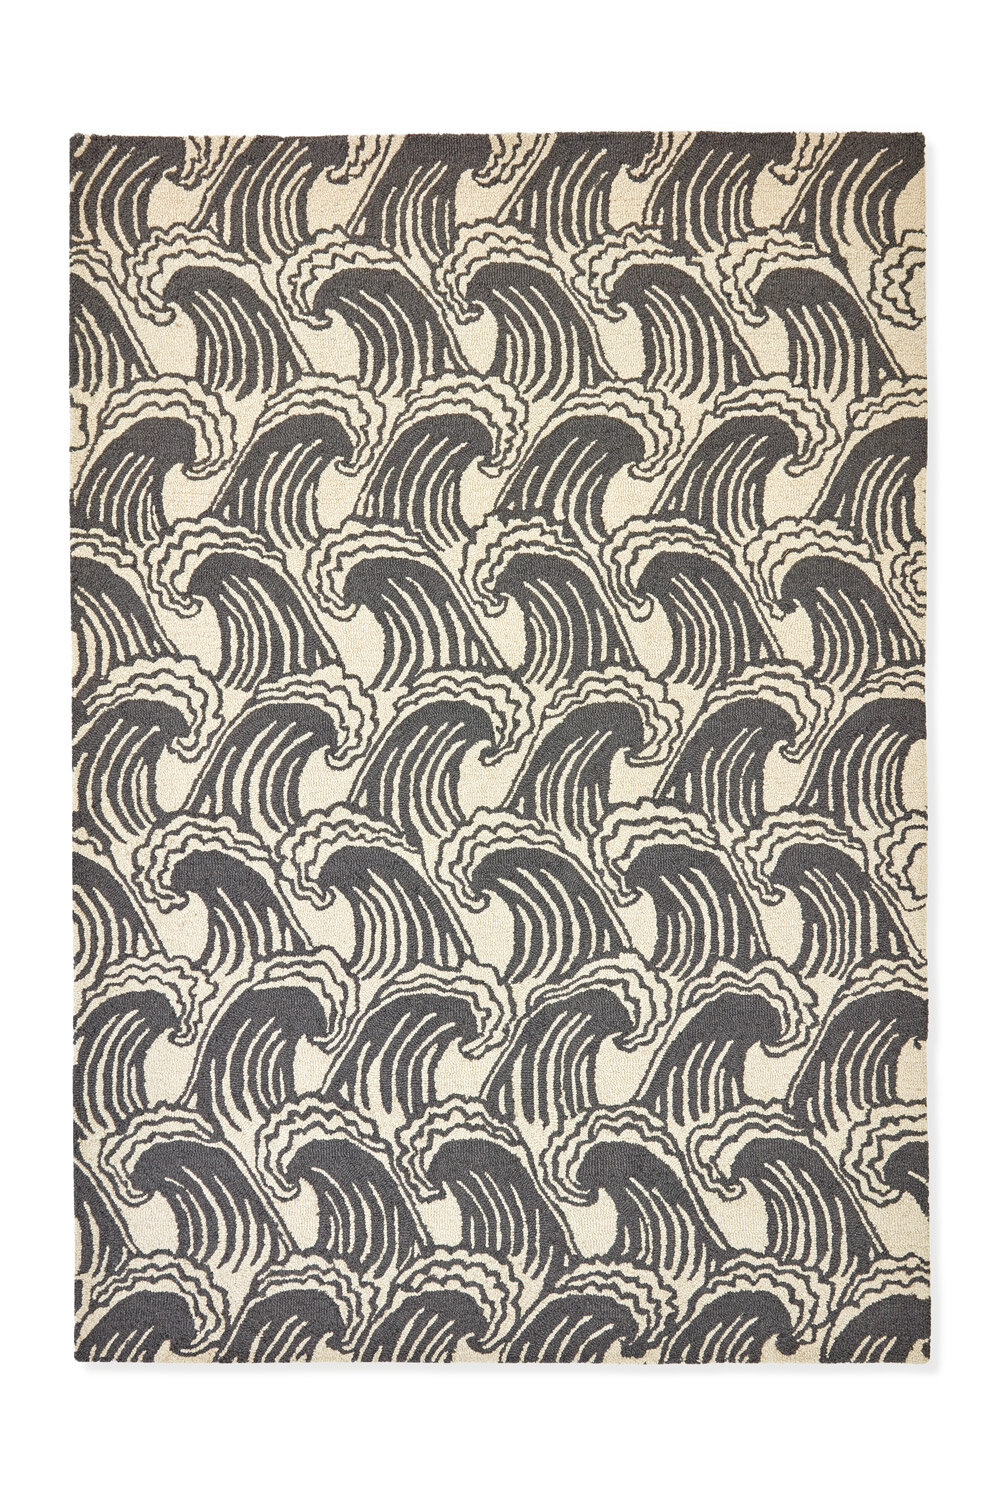 Ride the Wave Rug - Liquorice - by Scion